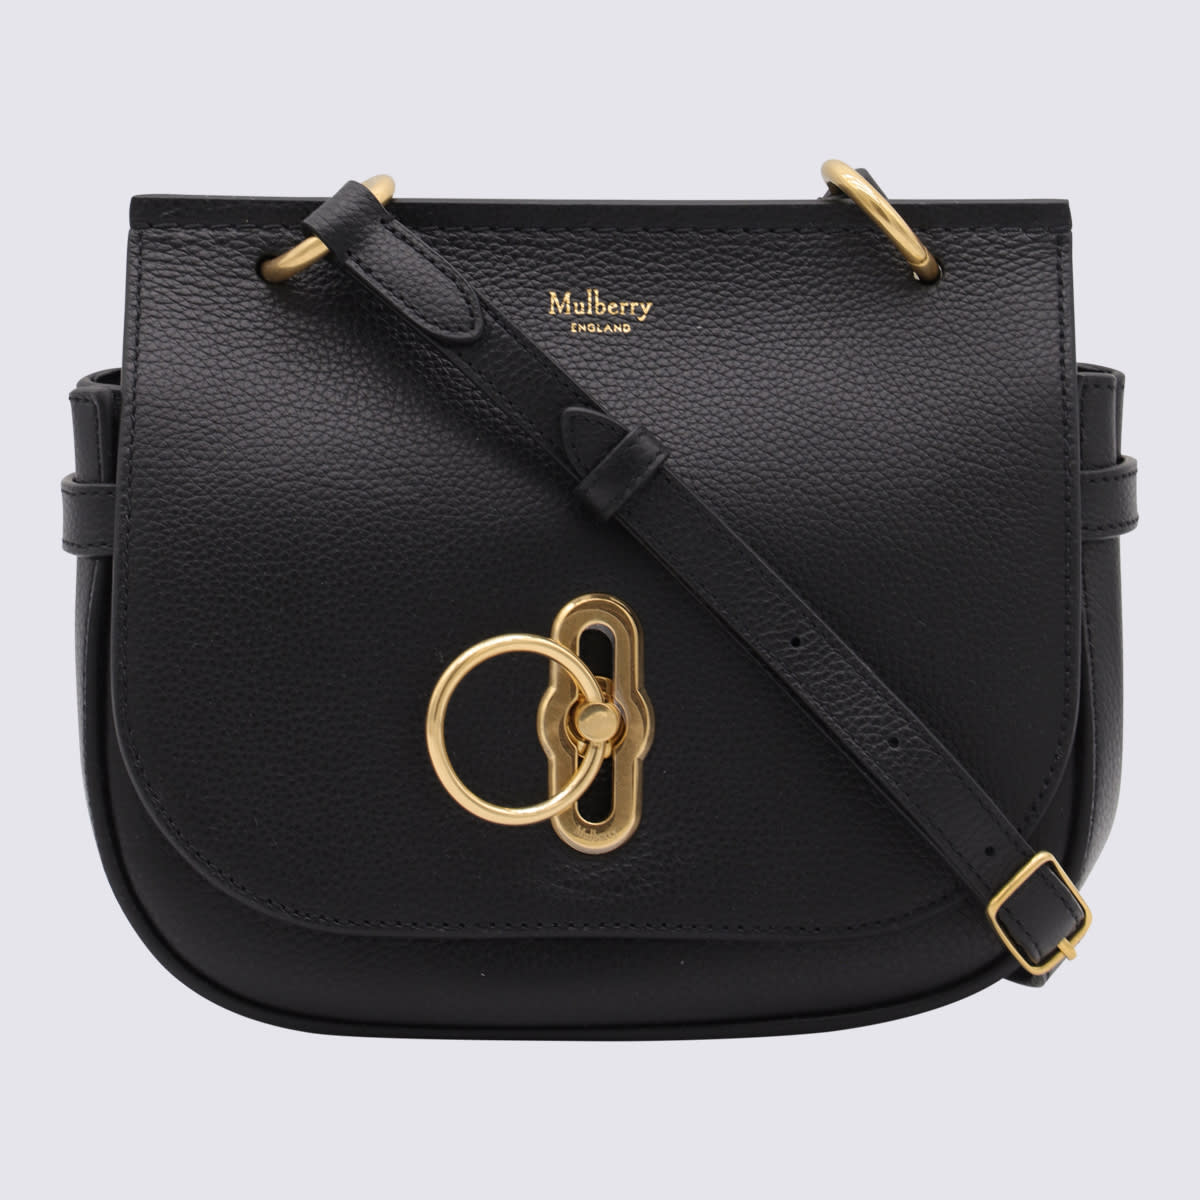 Mulberry Black Leather Amberley Small Shoulder Bag